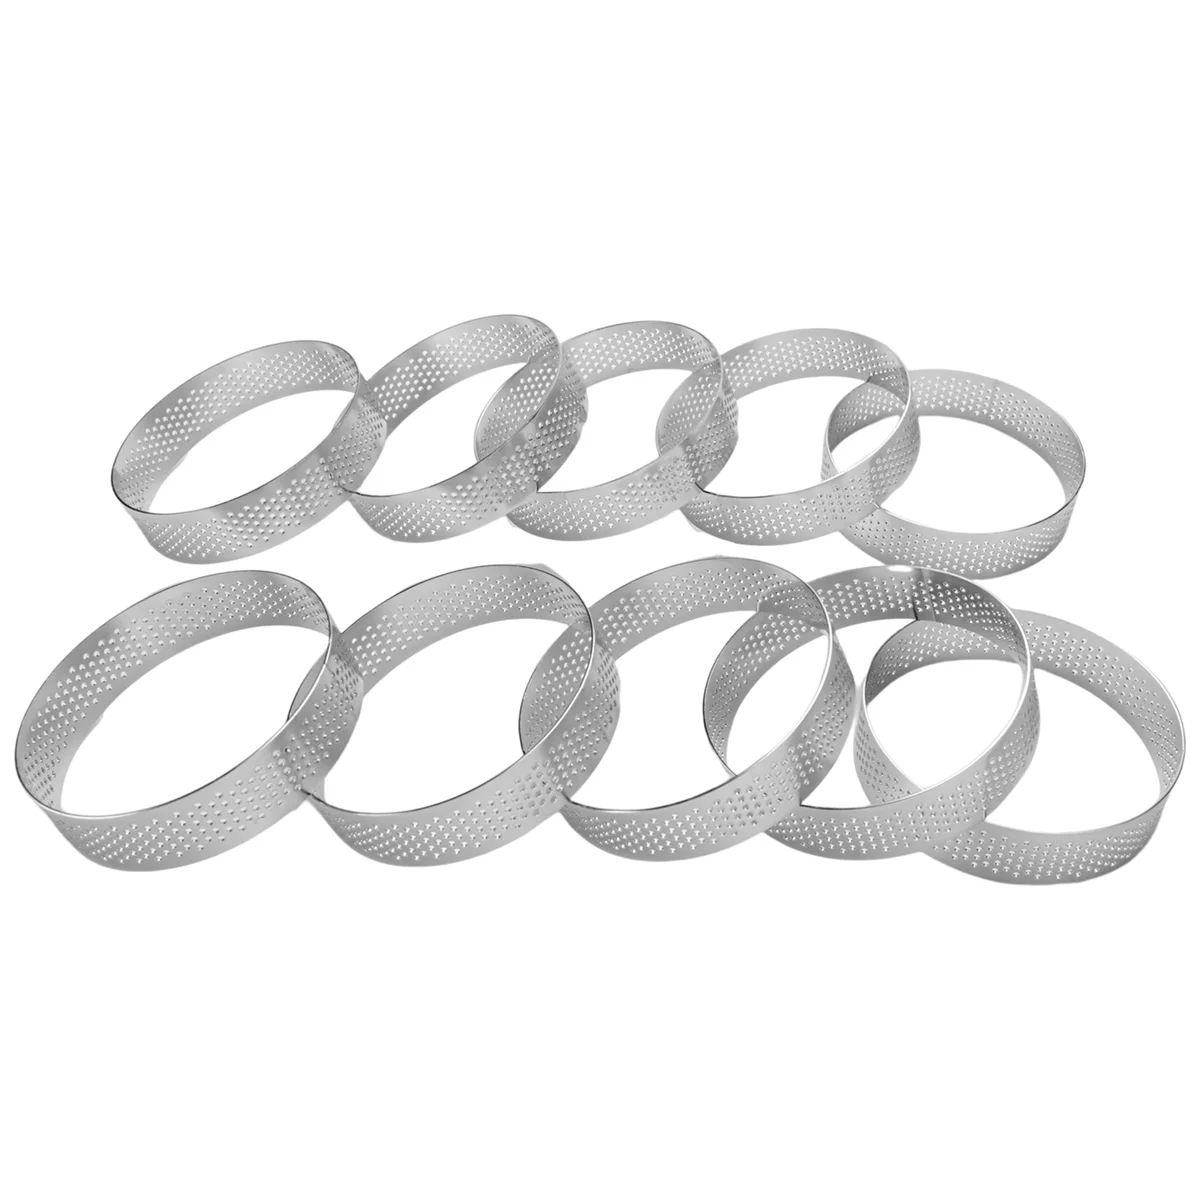 

10 Pack Stainless Steel Tart Ring, Heat-Resistant Perforated Cake Mousse Ring, Round Ring Baking Doughnut Tools, 8cm